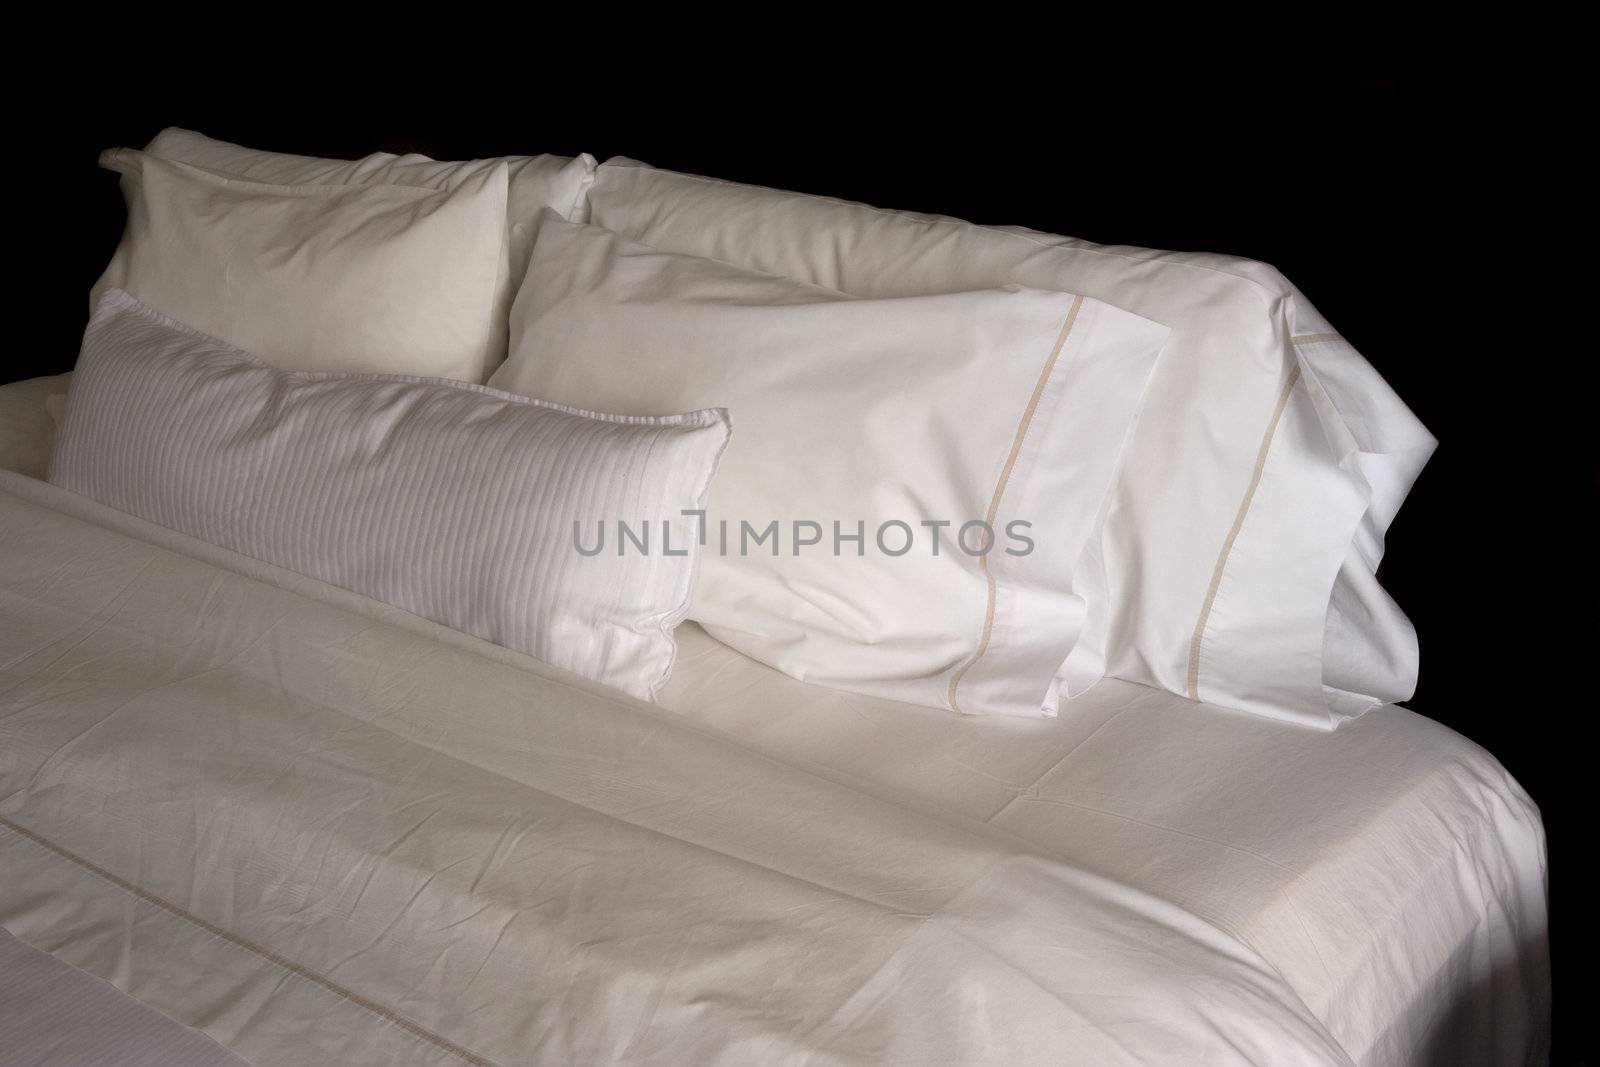 five white pillows on a king size hotel bed